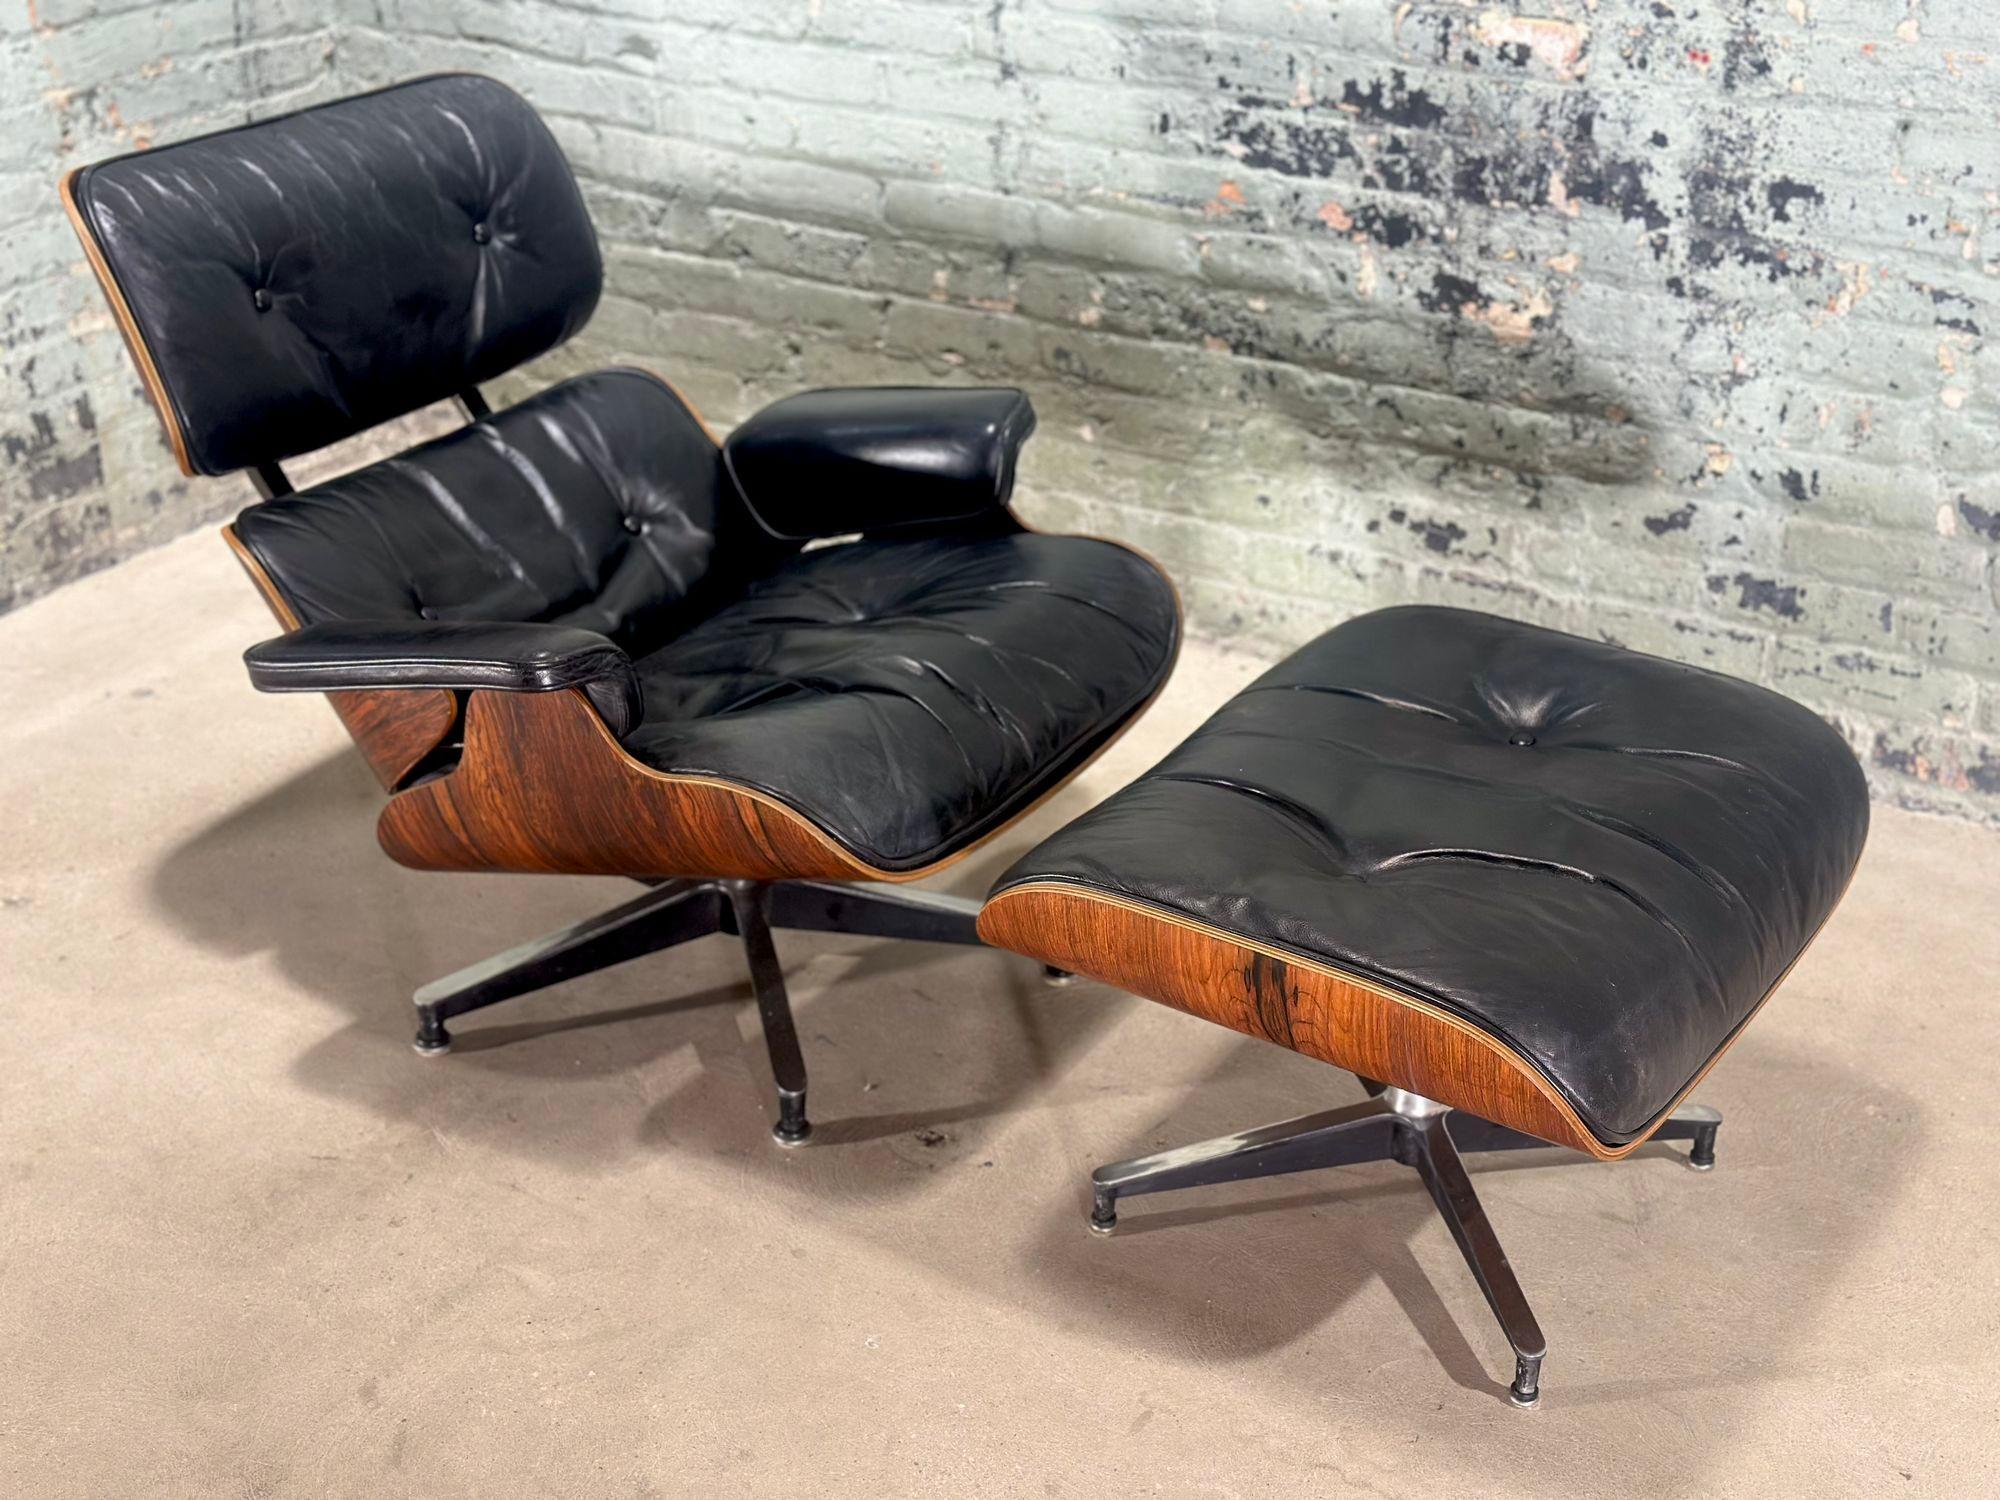 Early Rosewood Eames 670 Lounge Chair 671/Ottoman, early 1960 with down stuffed cushions. Rosewood has been oiled, aluminum polished, leather conditioned, and side shock mounts remounted. There is an old scratch on seat leather, as shown in photo,